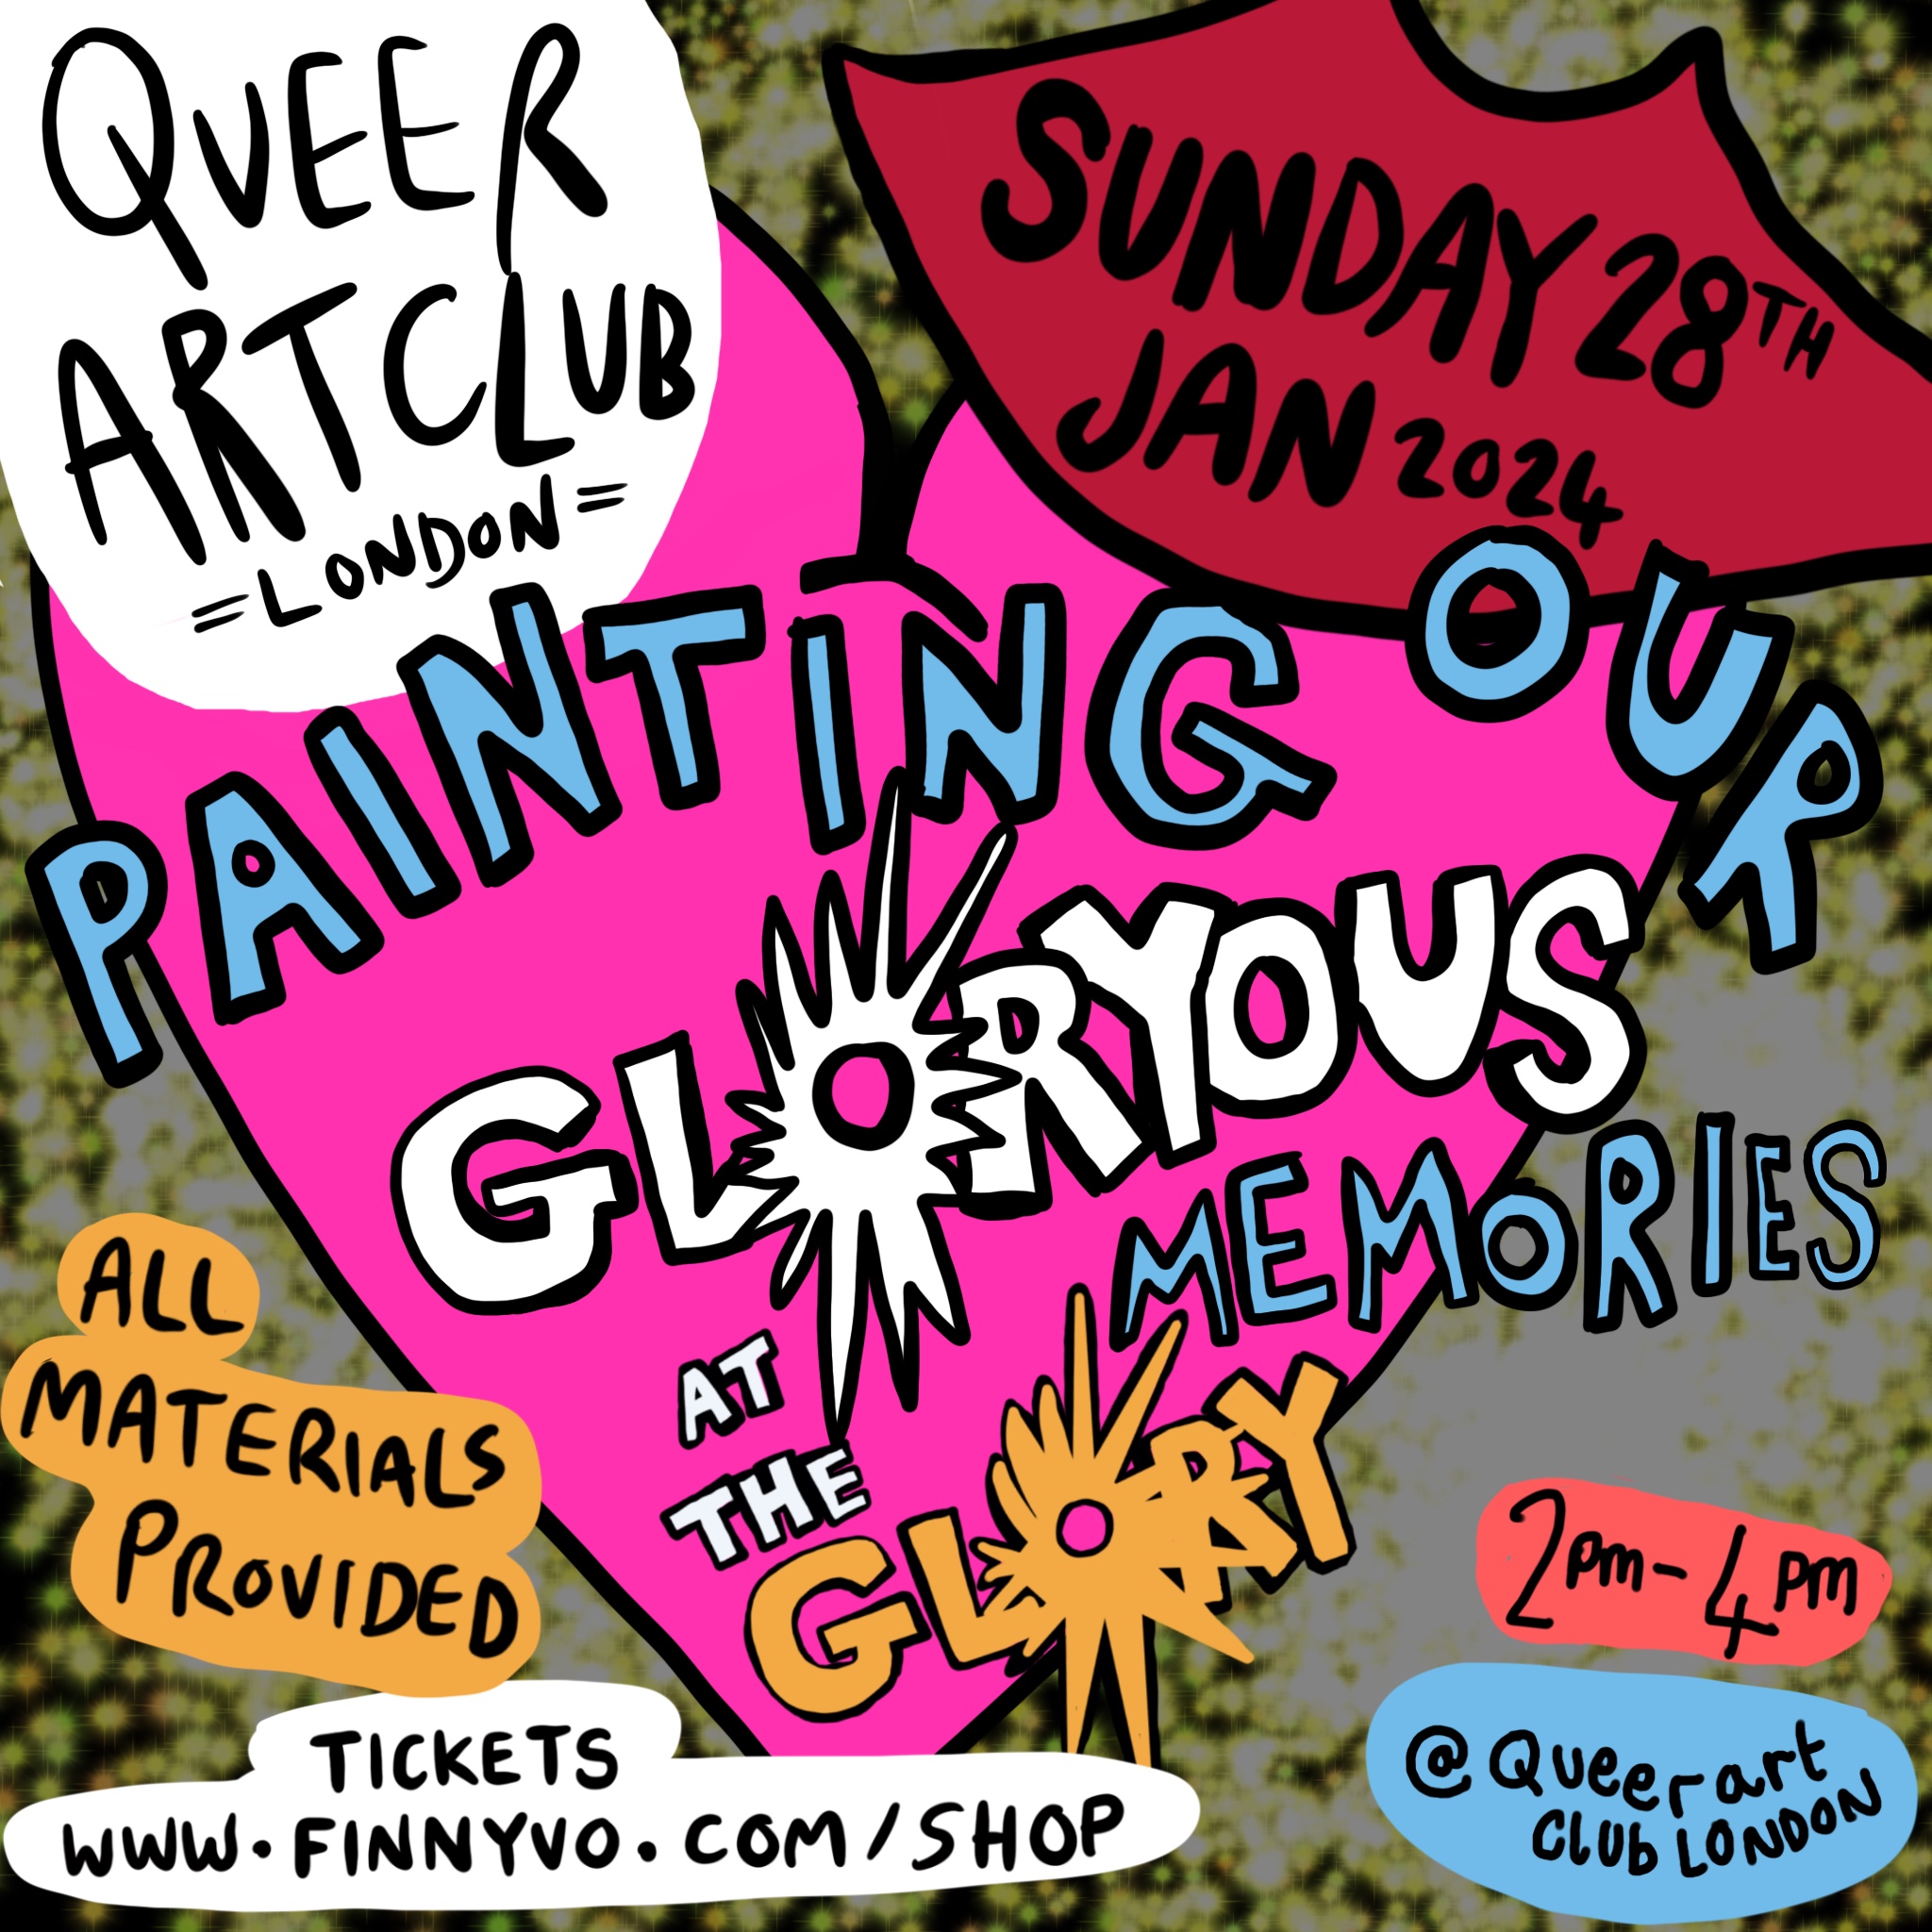 ART: Queer Art Club Special – Last one @ The Glory. Painting our Glorious memories.